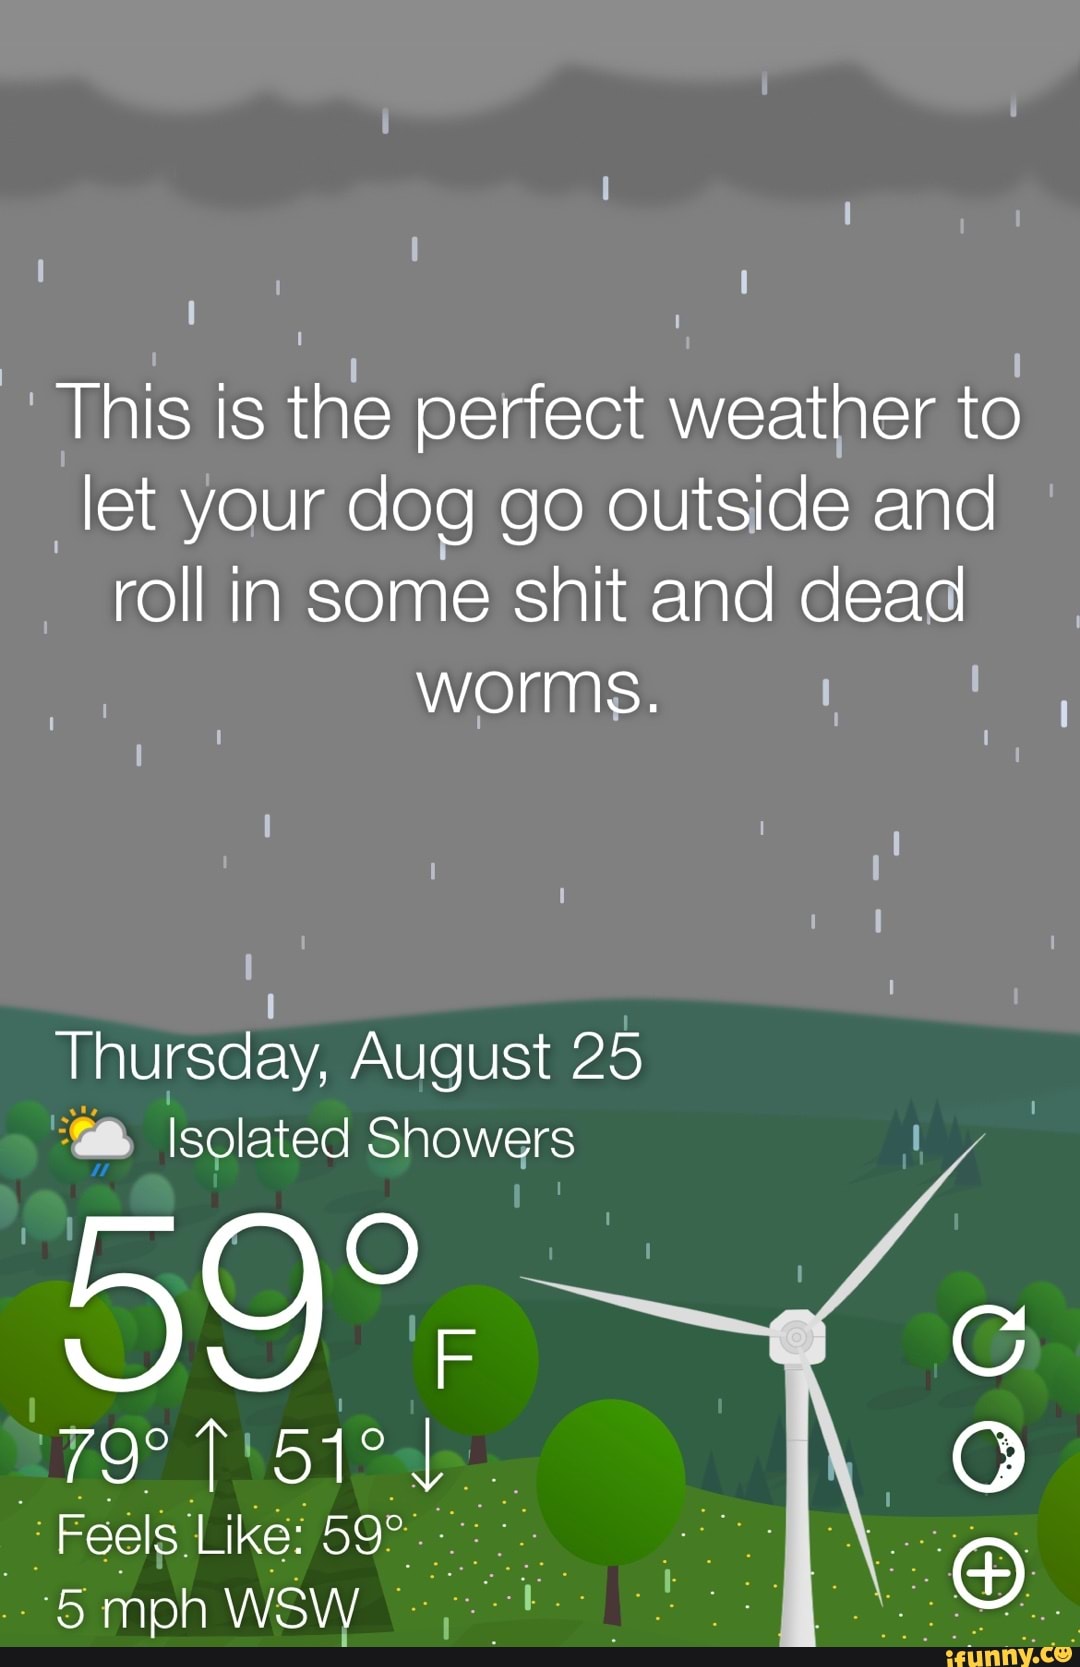 This is the perfect weather to let your dog go outside and roll in some